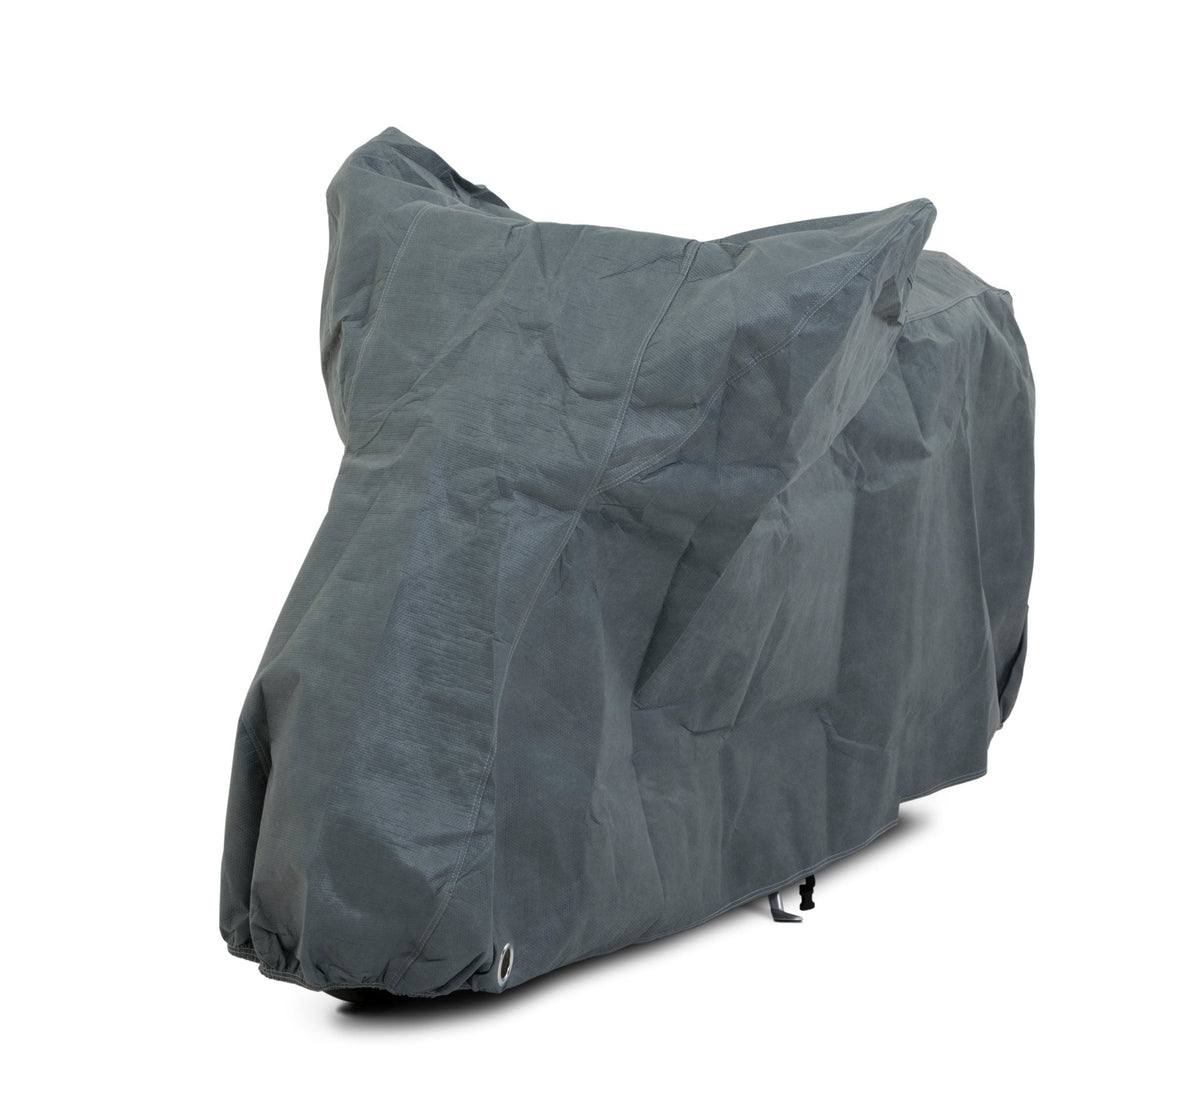 Stormforce best outdoor motorcycle covers for SUZUKI - Storm Motorcycle Covers